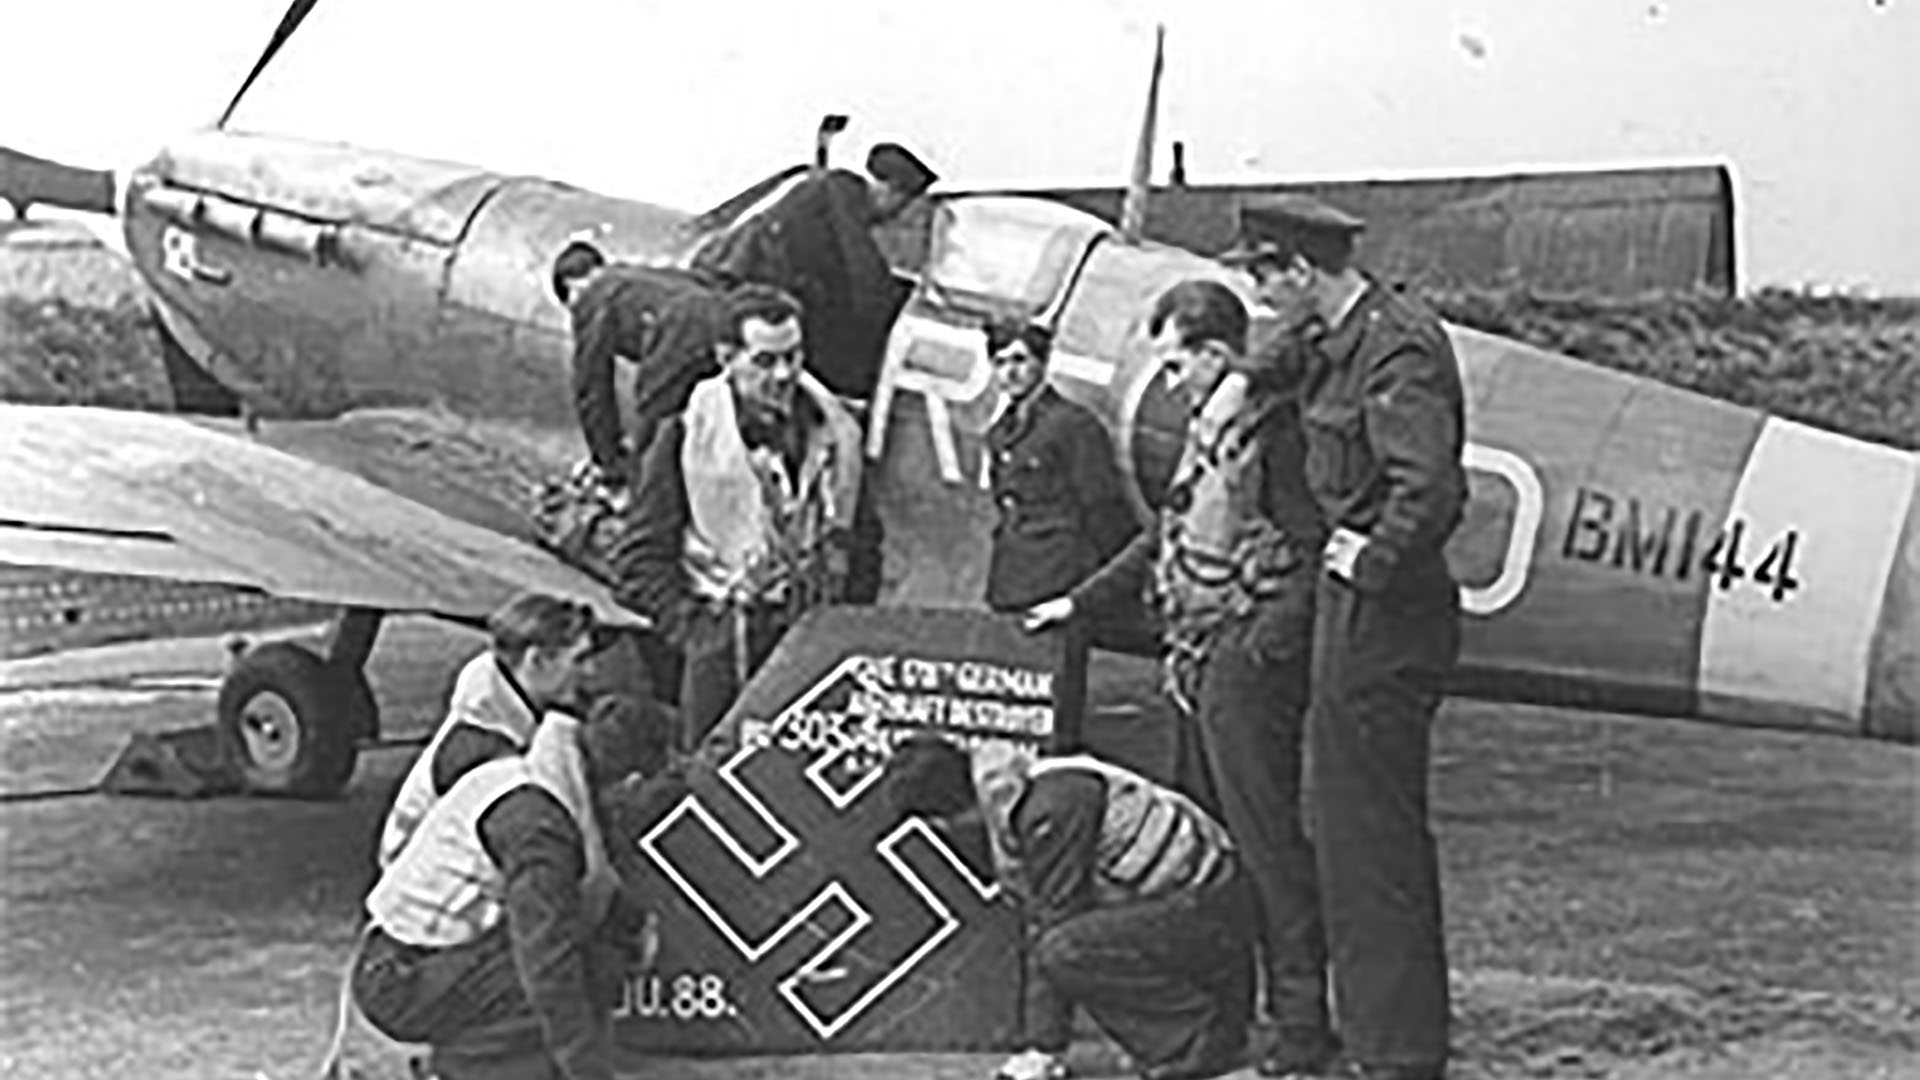 Air crew of R.A.F. 303 (Kościuszko) Squadron, one of several Polish squadrons, chalk up their 178th battle victory over the Luftwaffe next to Supermarine Spitfire V BM144.